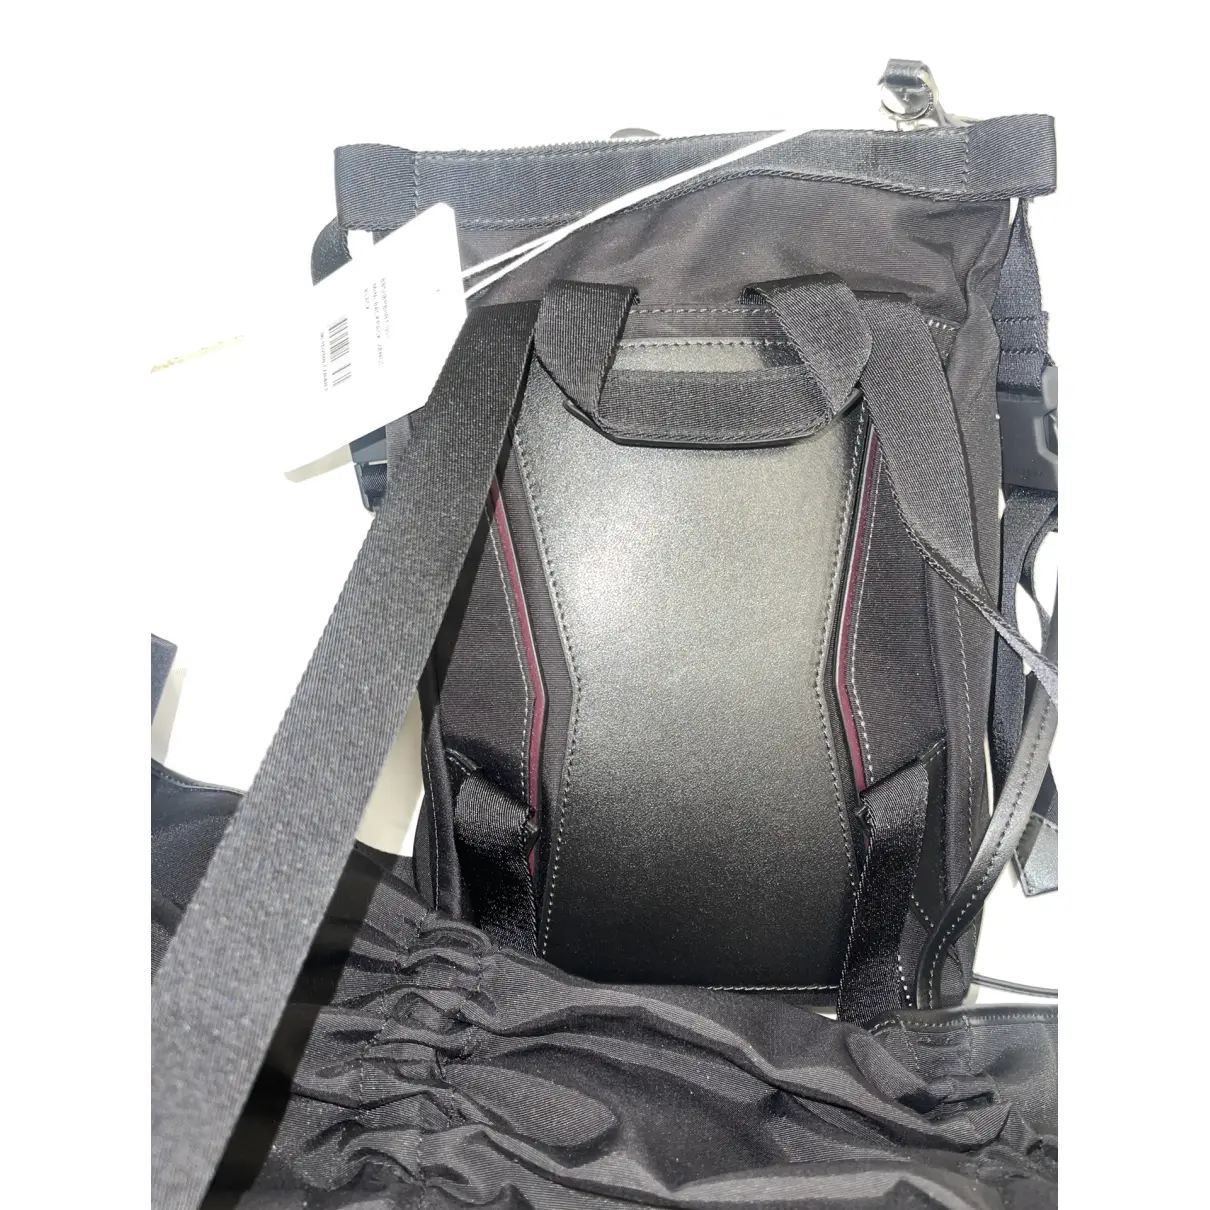 Leather backpack Givenchy